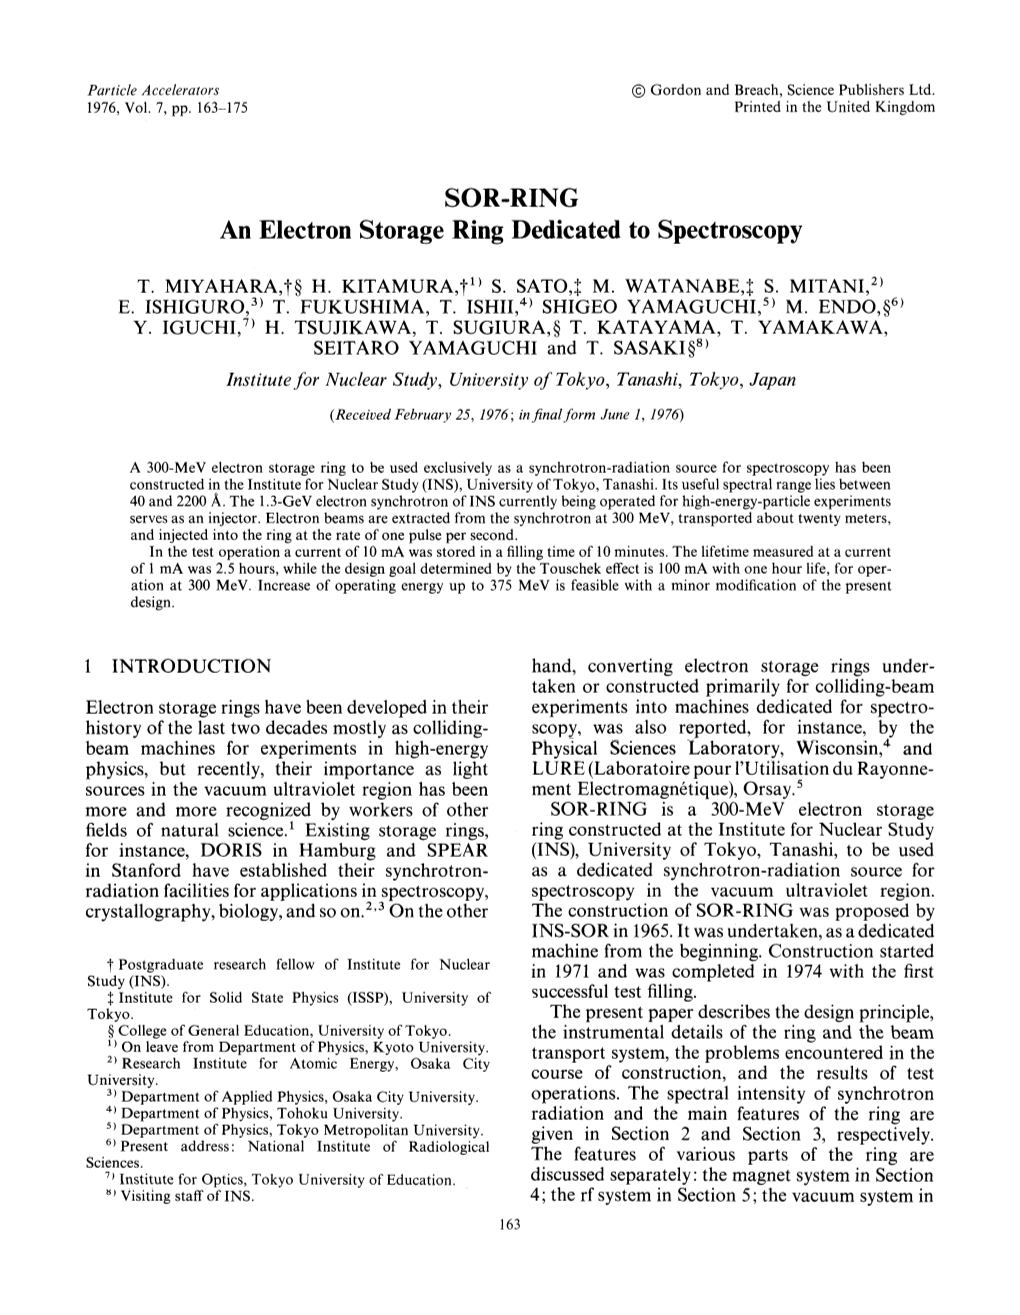 SOR-RING an Electron Storage Ring Dedicated to Spectroscopy